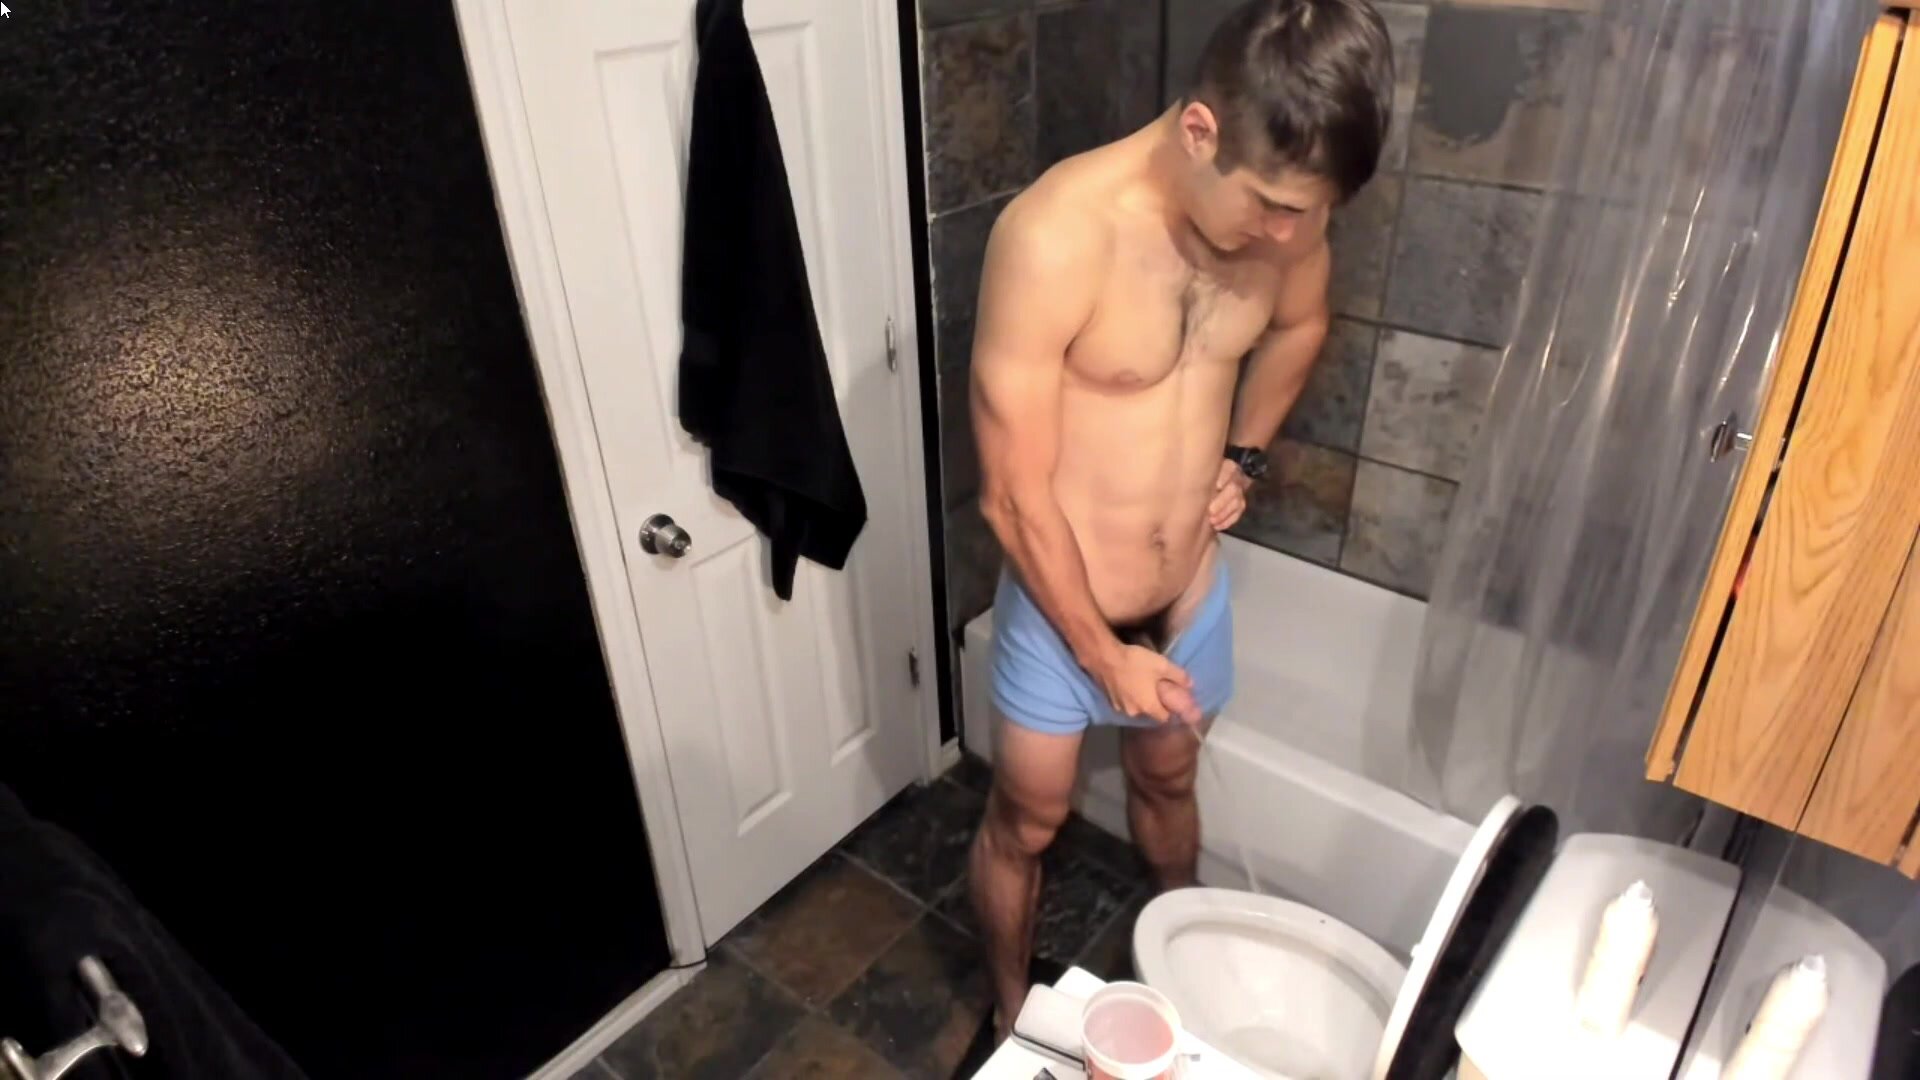 spying hot boy taking a piss 2